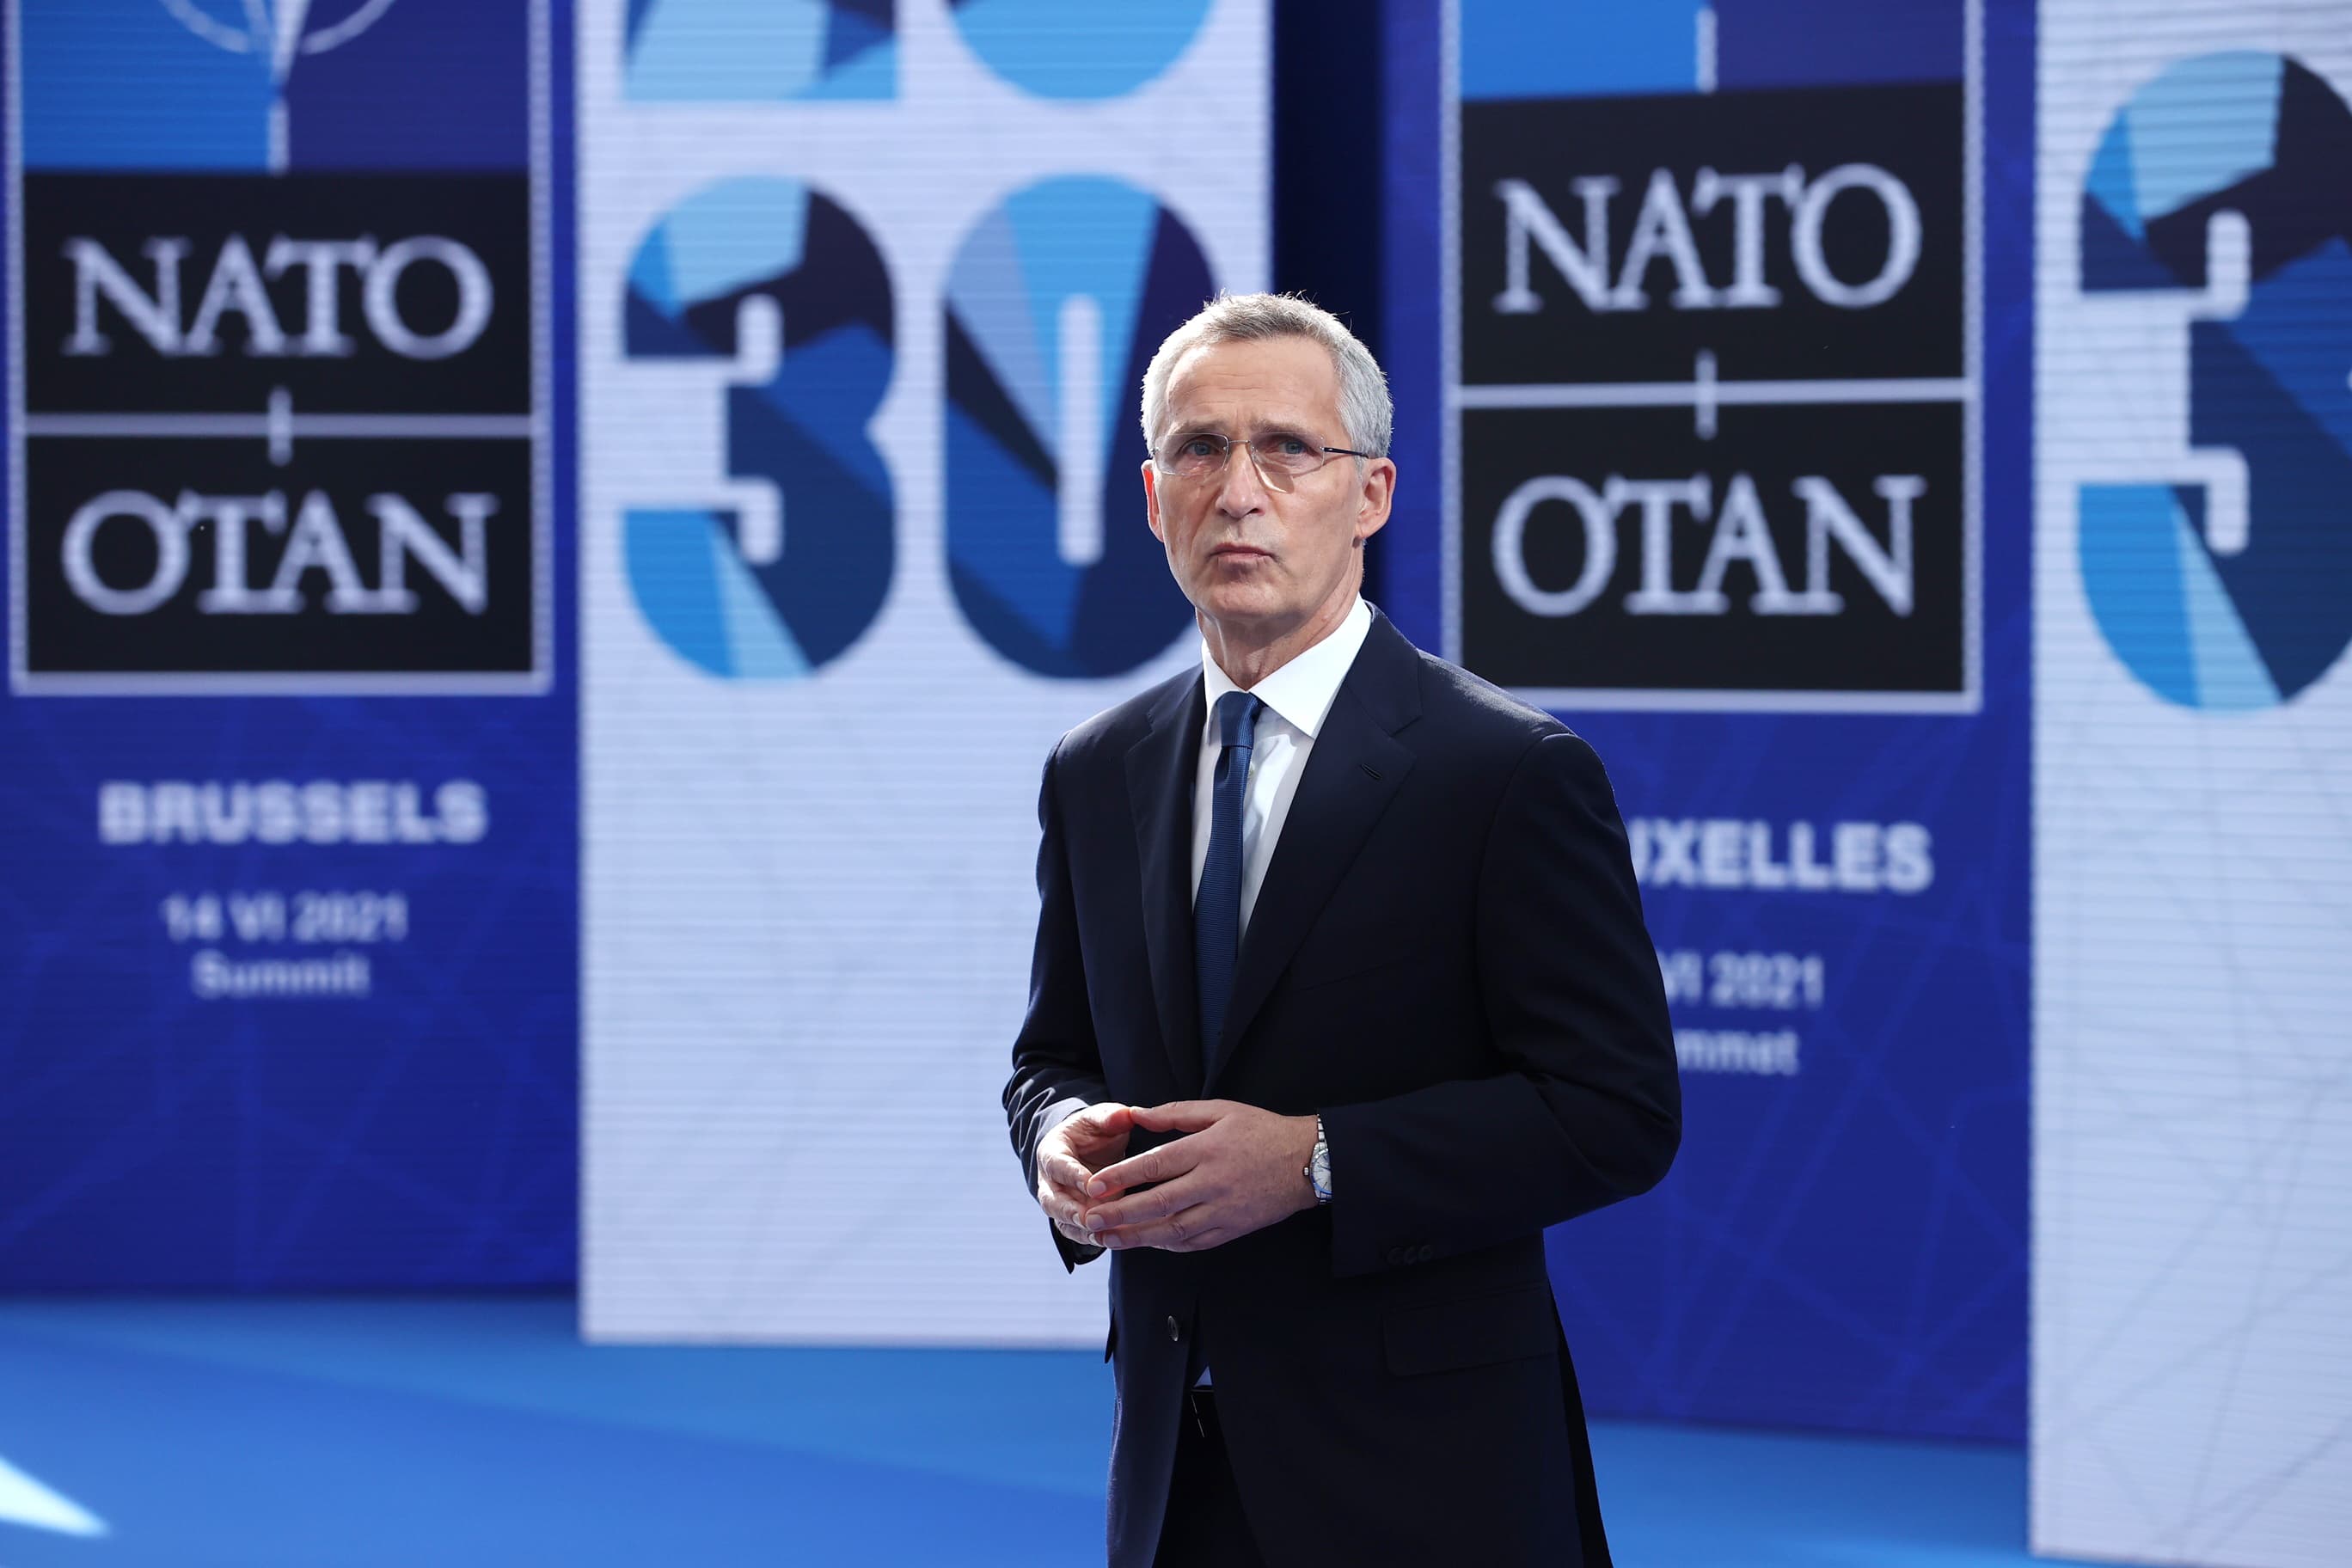 NATO to respond to China's 'coercive behavior,' says Beijing does not share its values